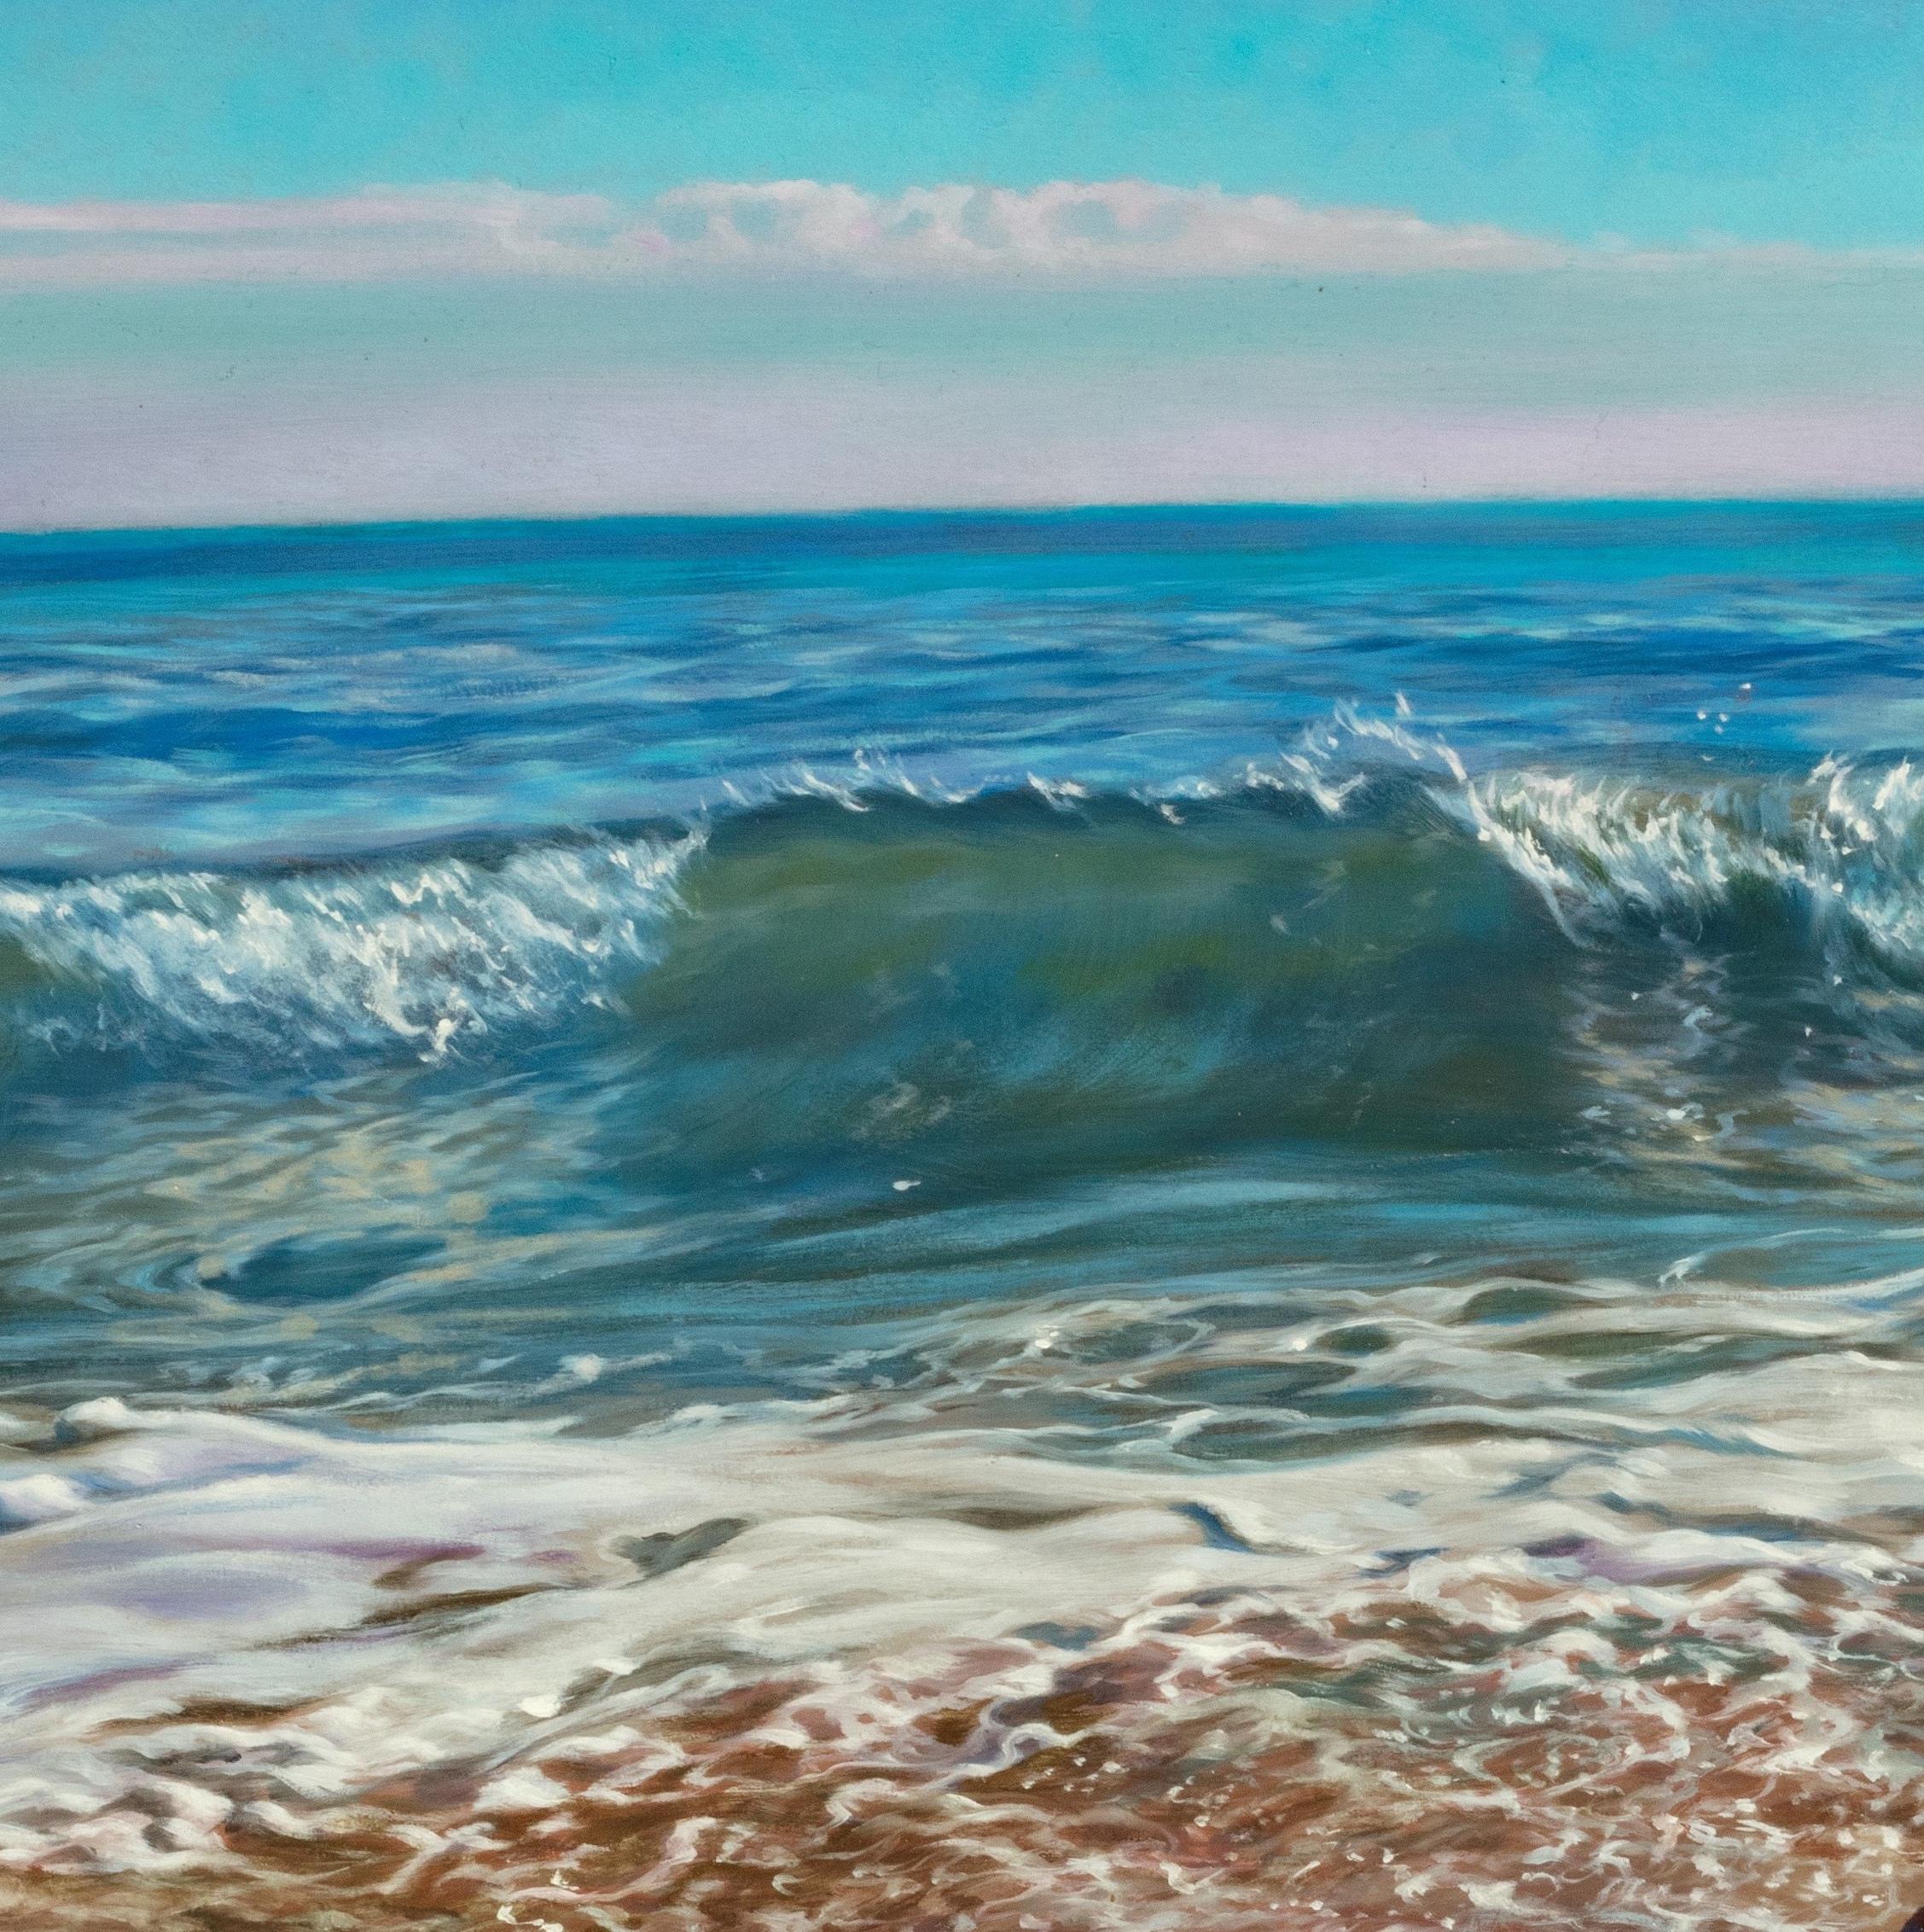 'Pink Skies' Contemporary Seascape painting of water, rocks, pebbles and waves - Painting by Pepe Linares